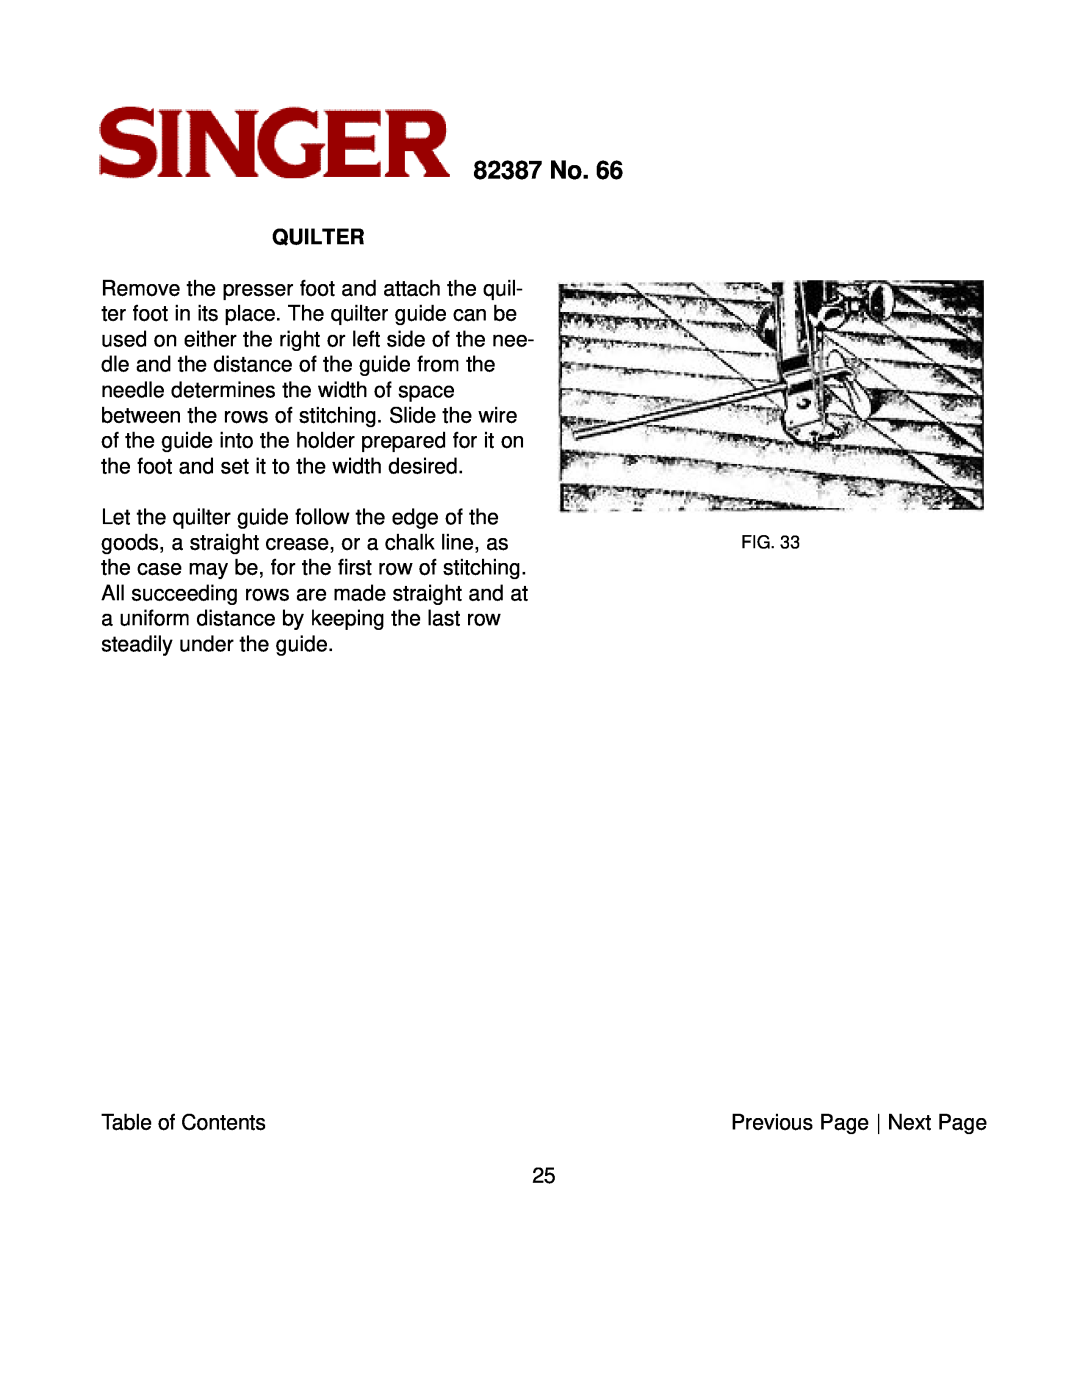 Singer instruction manual Quilter, 82387 No 